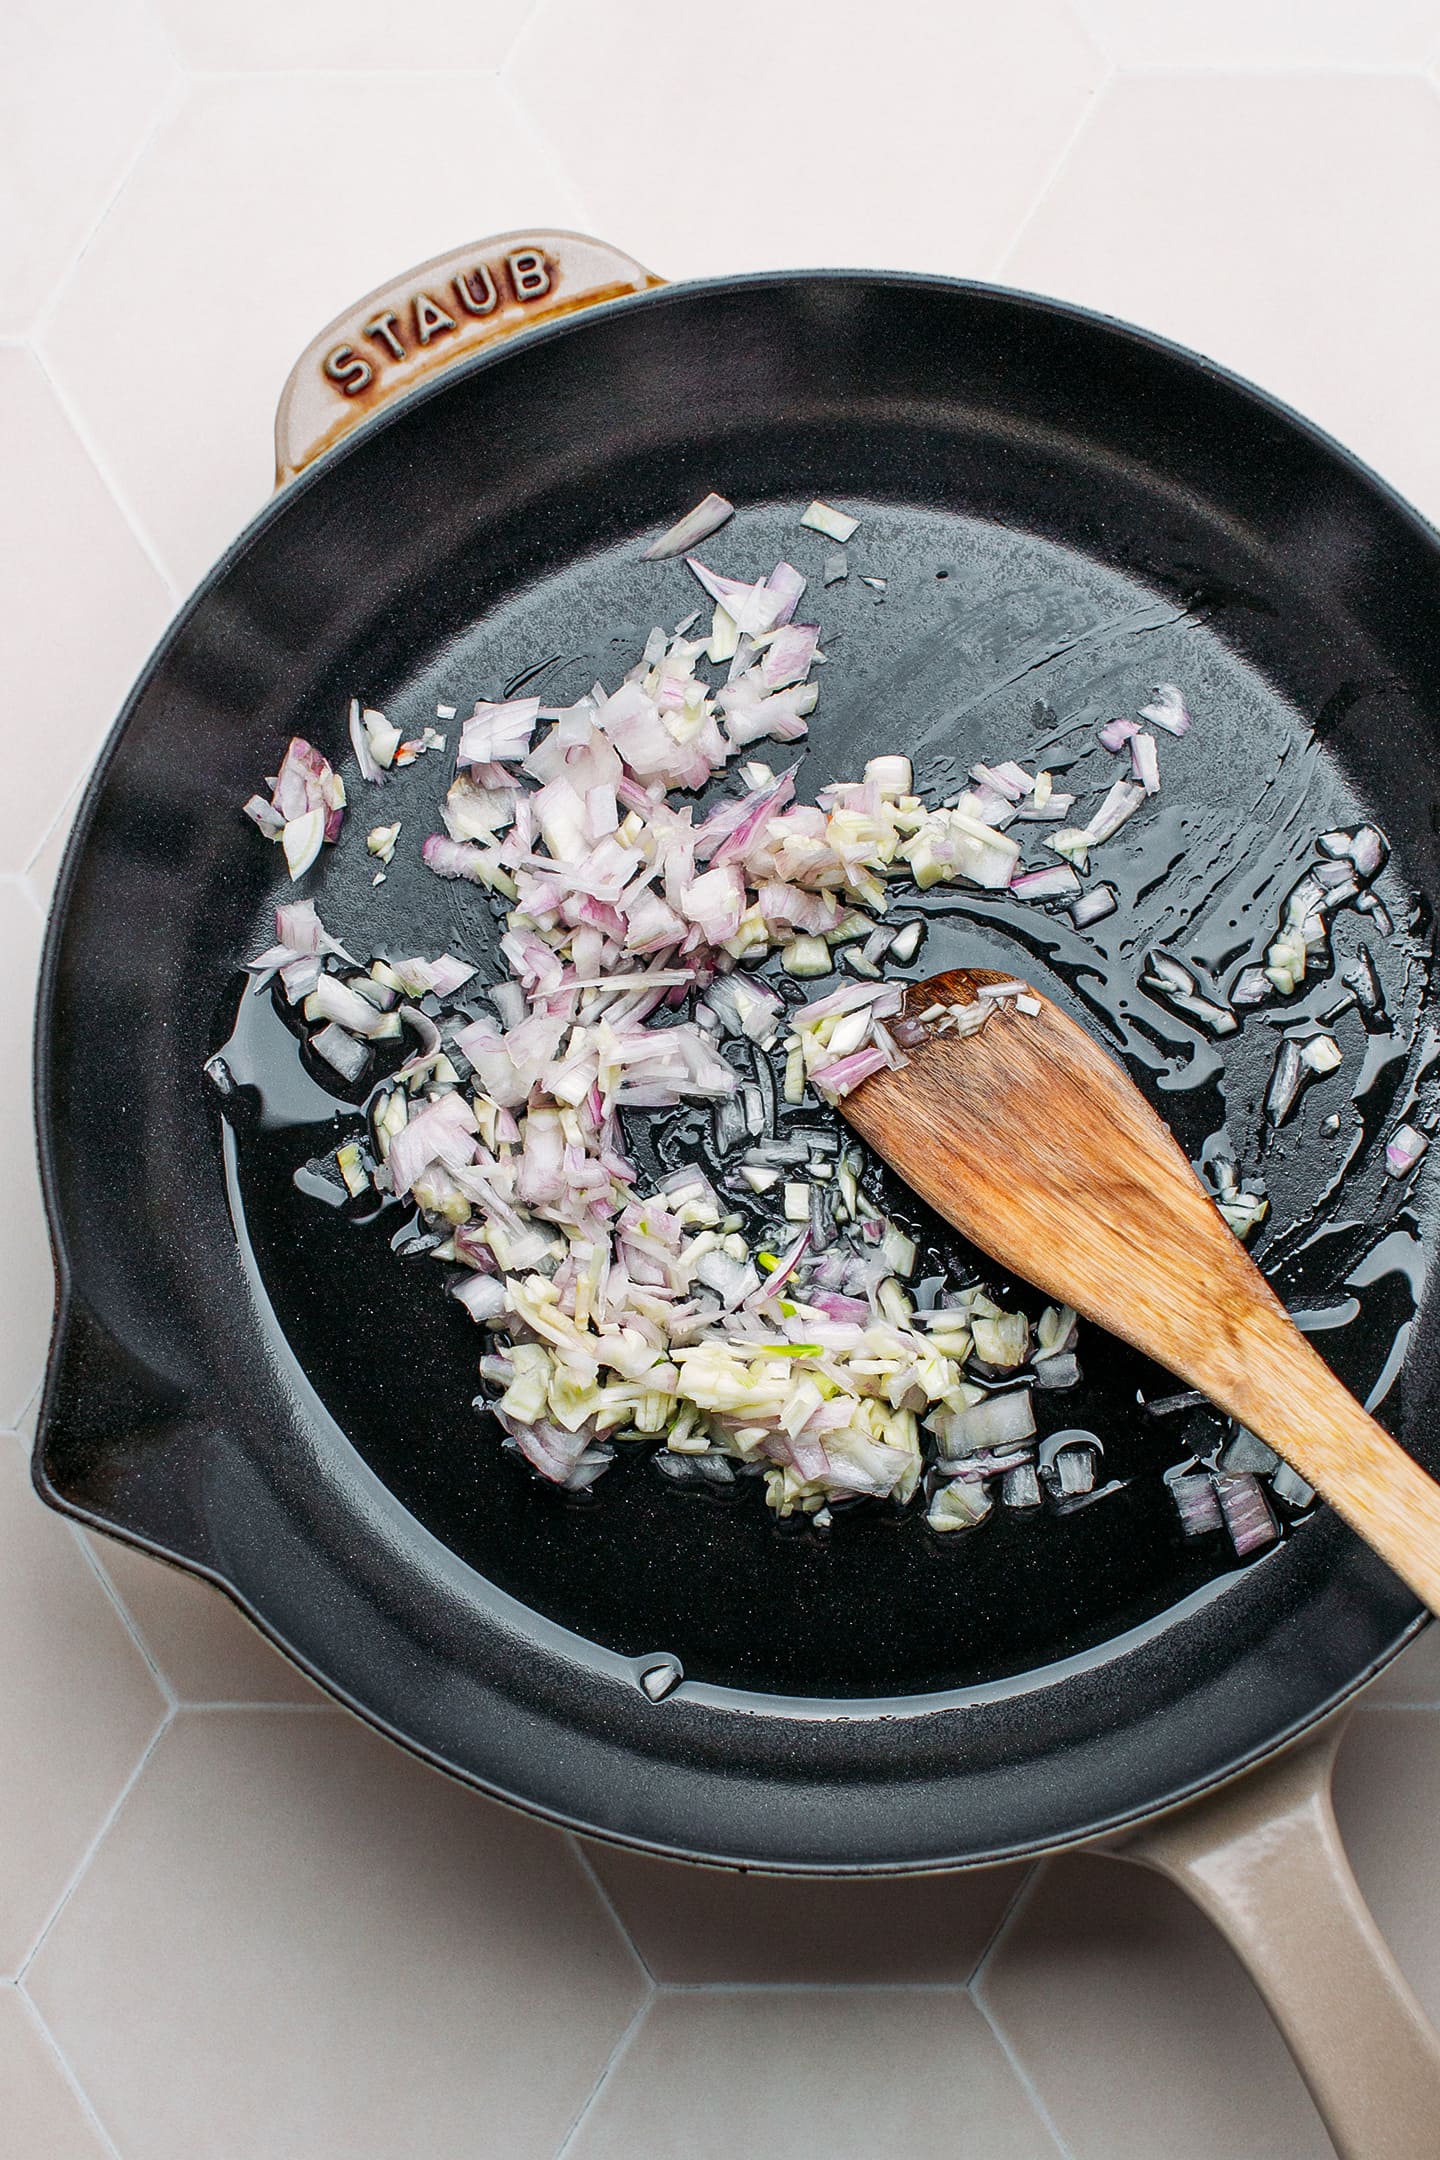 Sautéed shallots and garlic in a skillet.